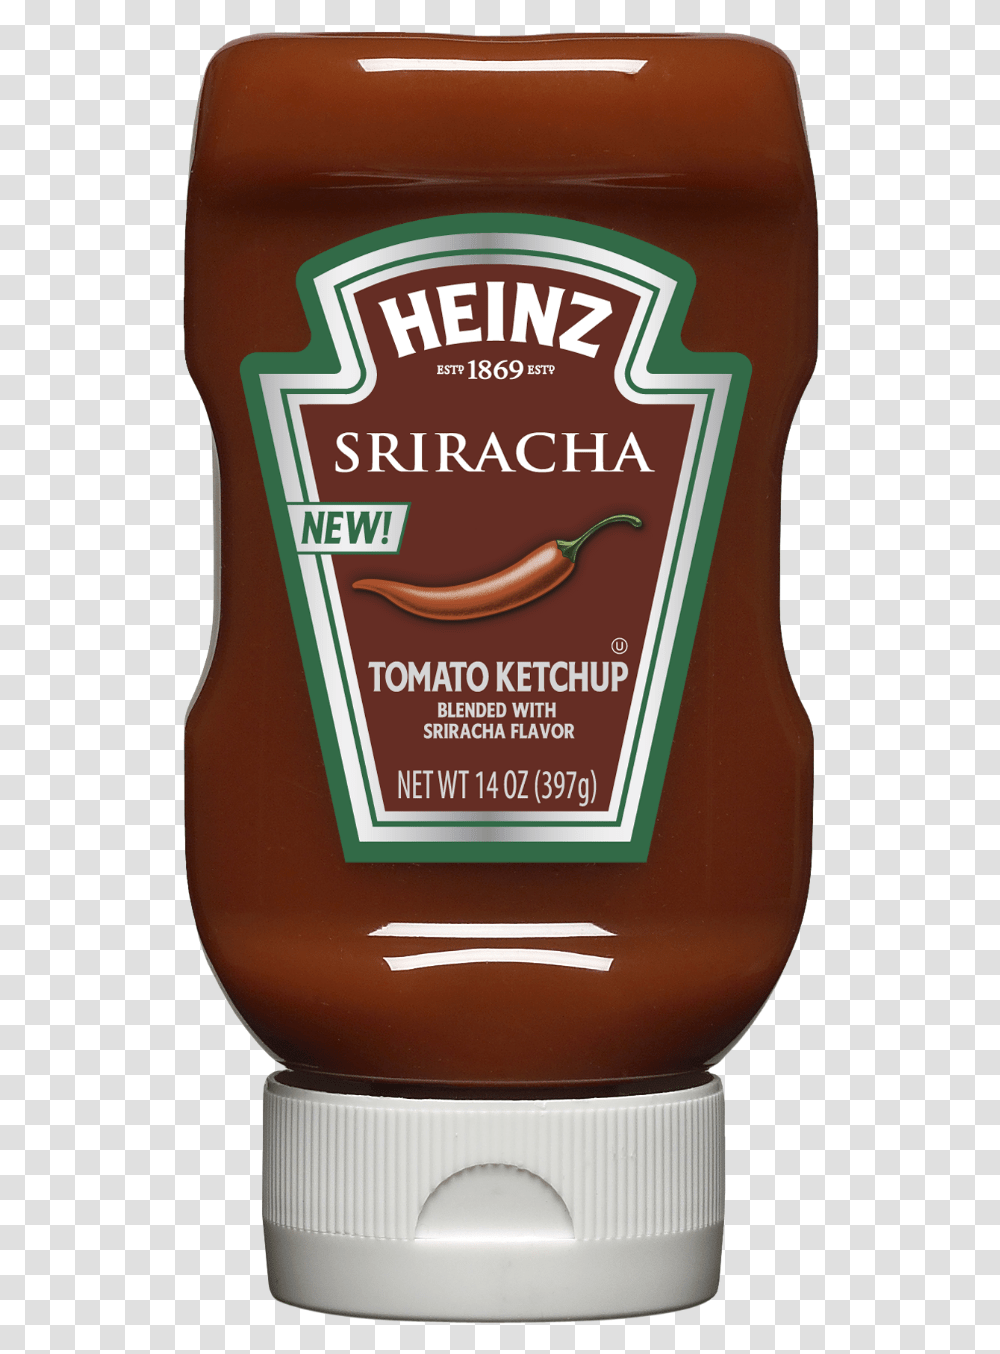 Heinz Launches Ketchup Flavored With Thai Hot Sauce Heinz Sriracha Ketchup, Food, Label Transparent Png